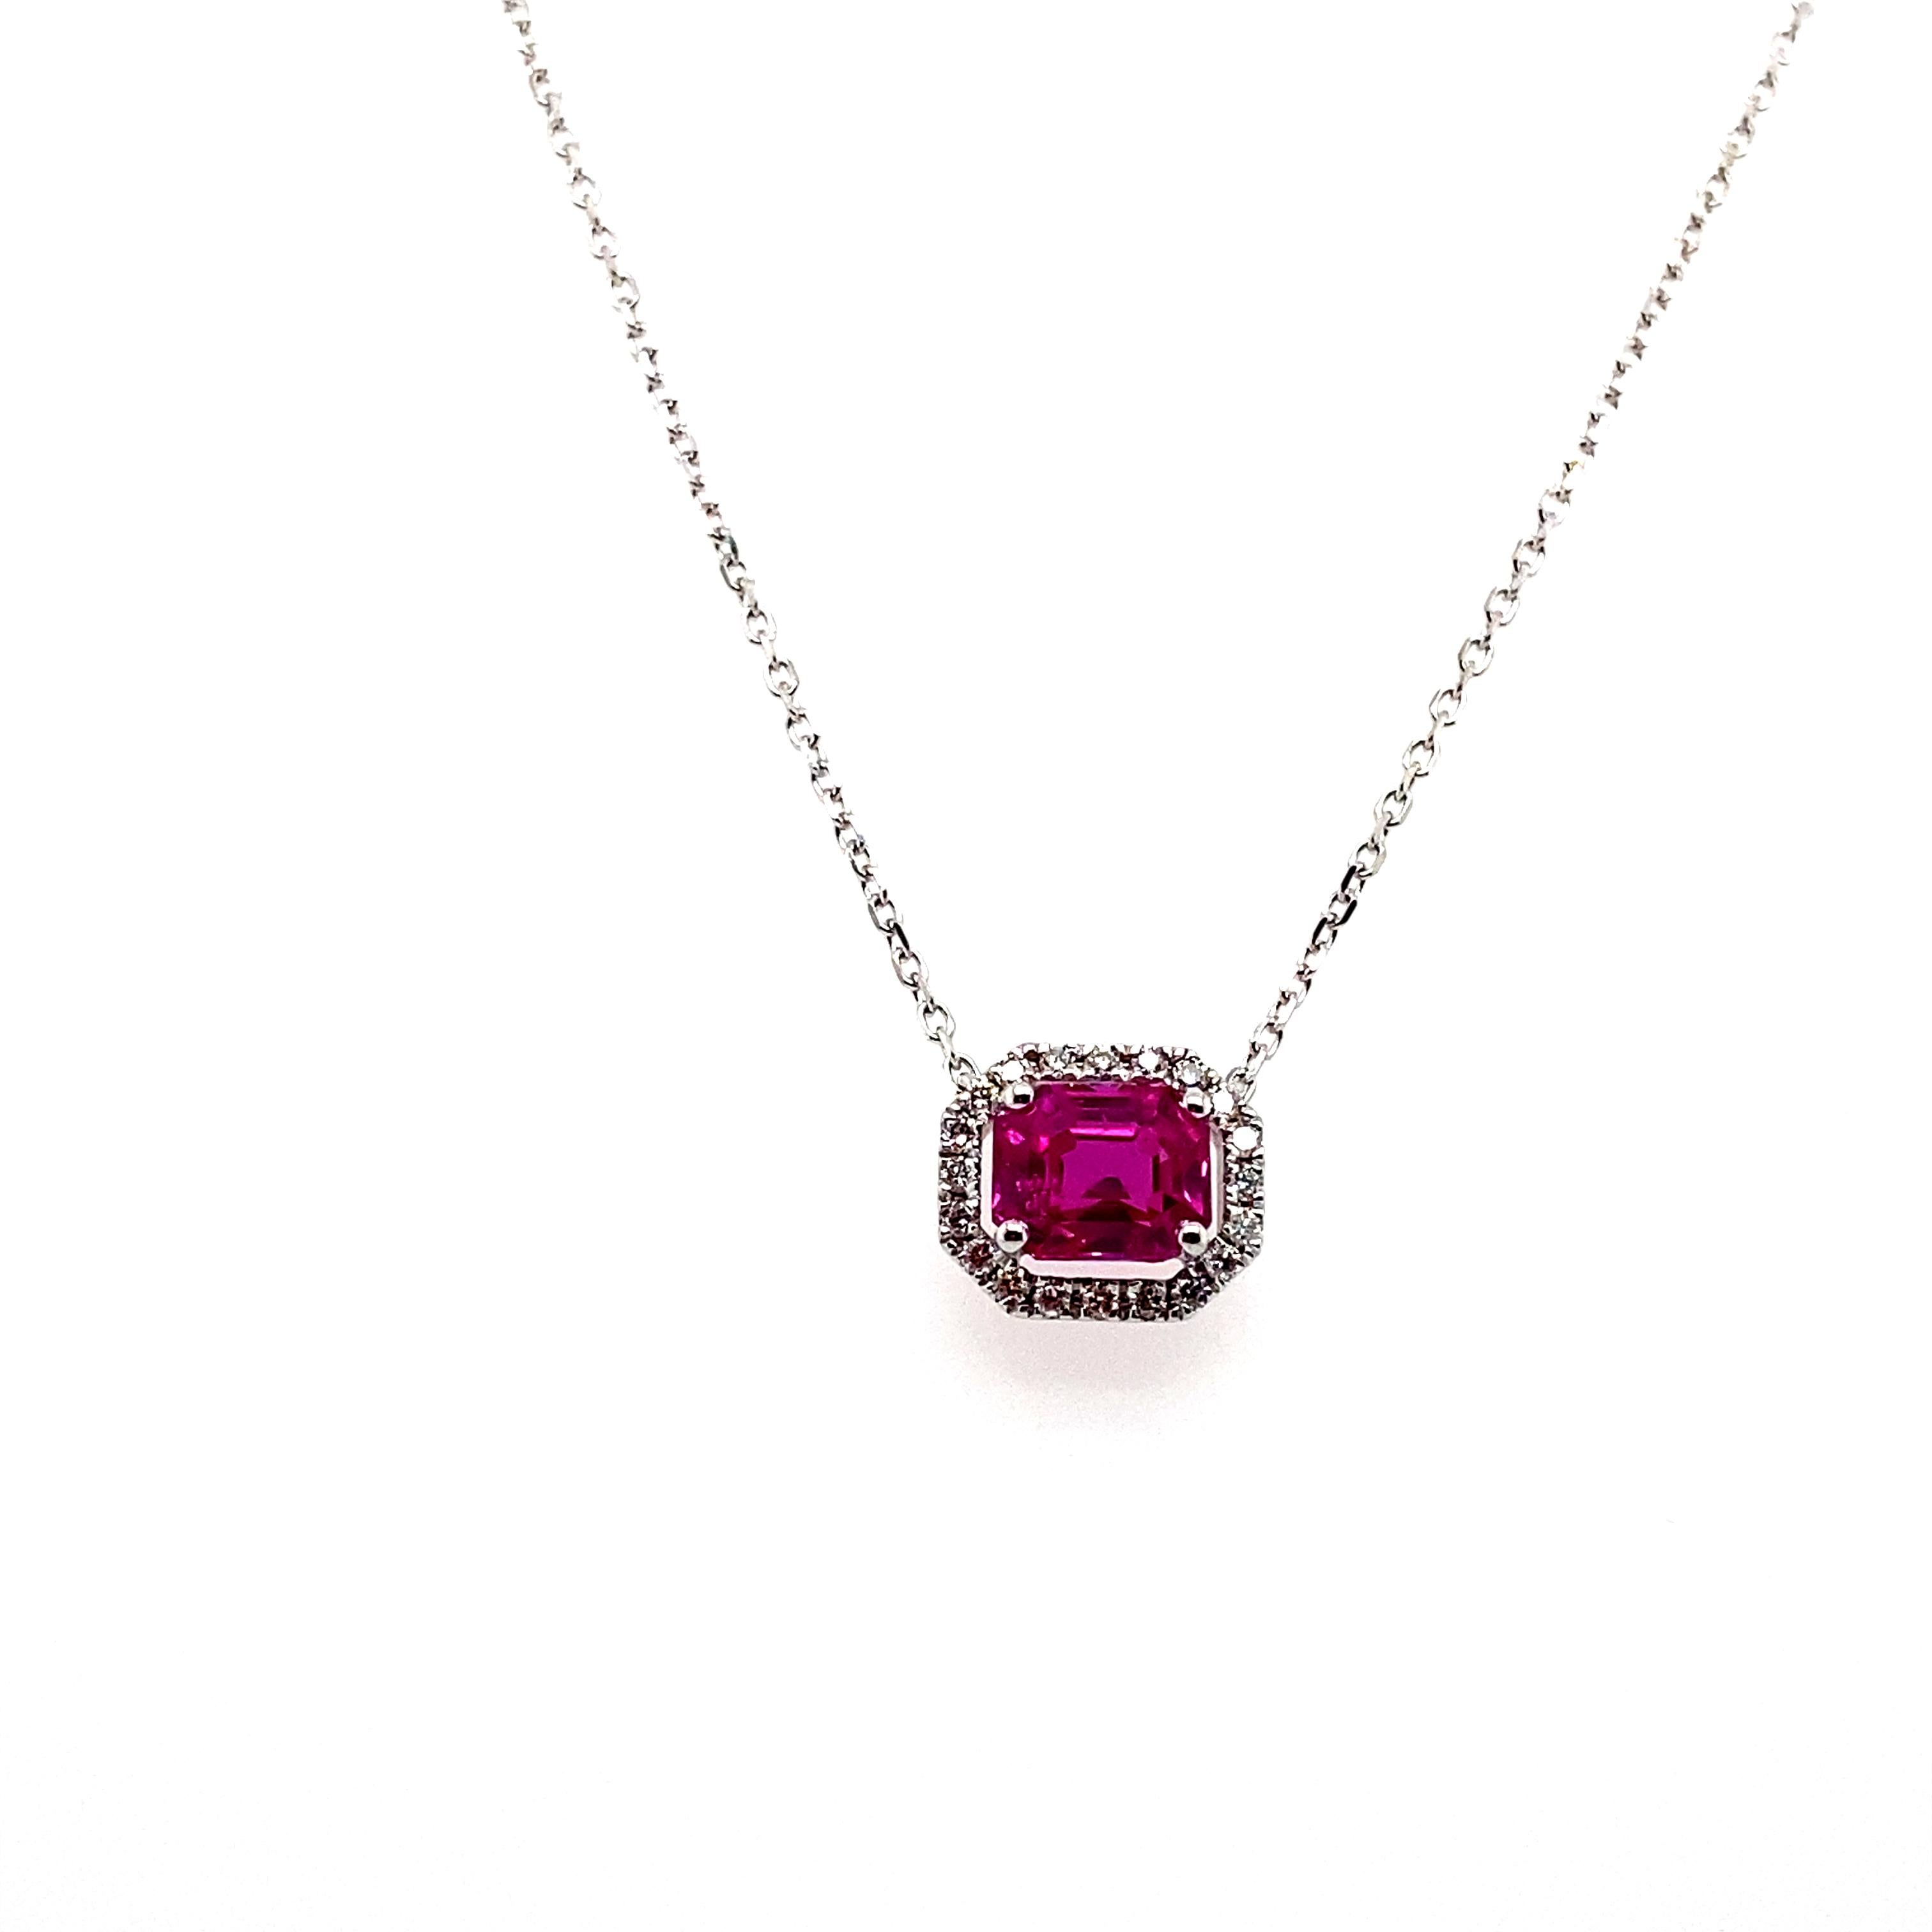 Contemporary 1.35 Carat Octagon-Cut Burma No Heat Ruby and White Diamond Pendant Necklace For Sale